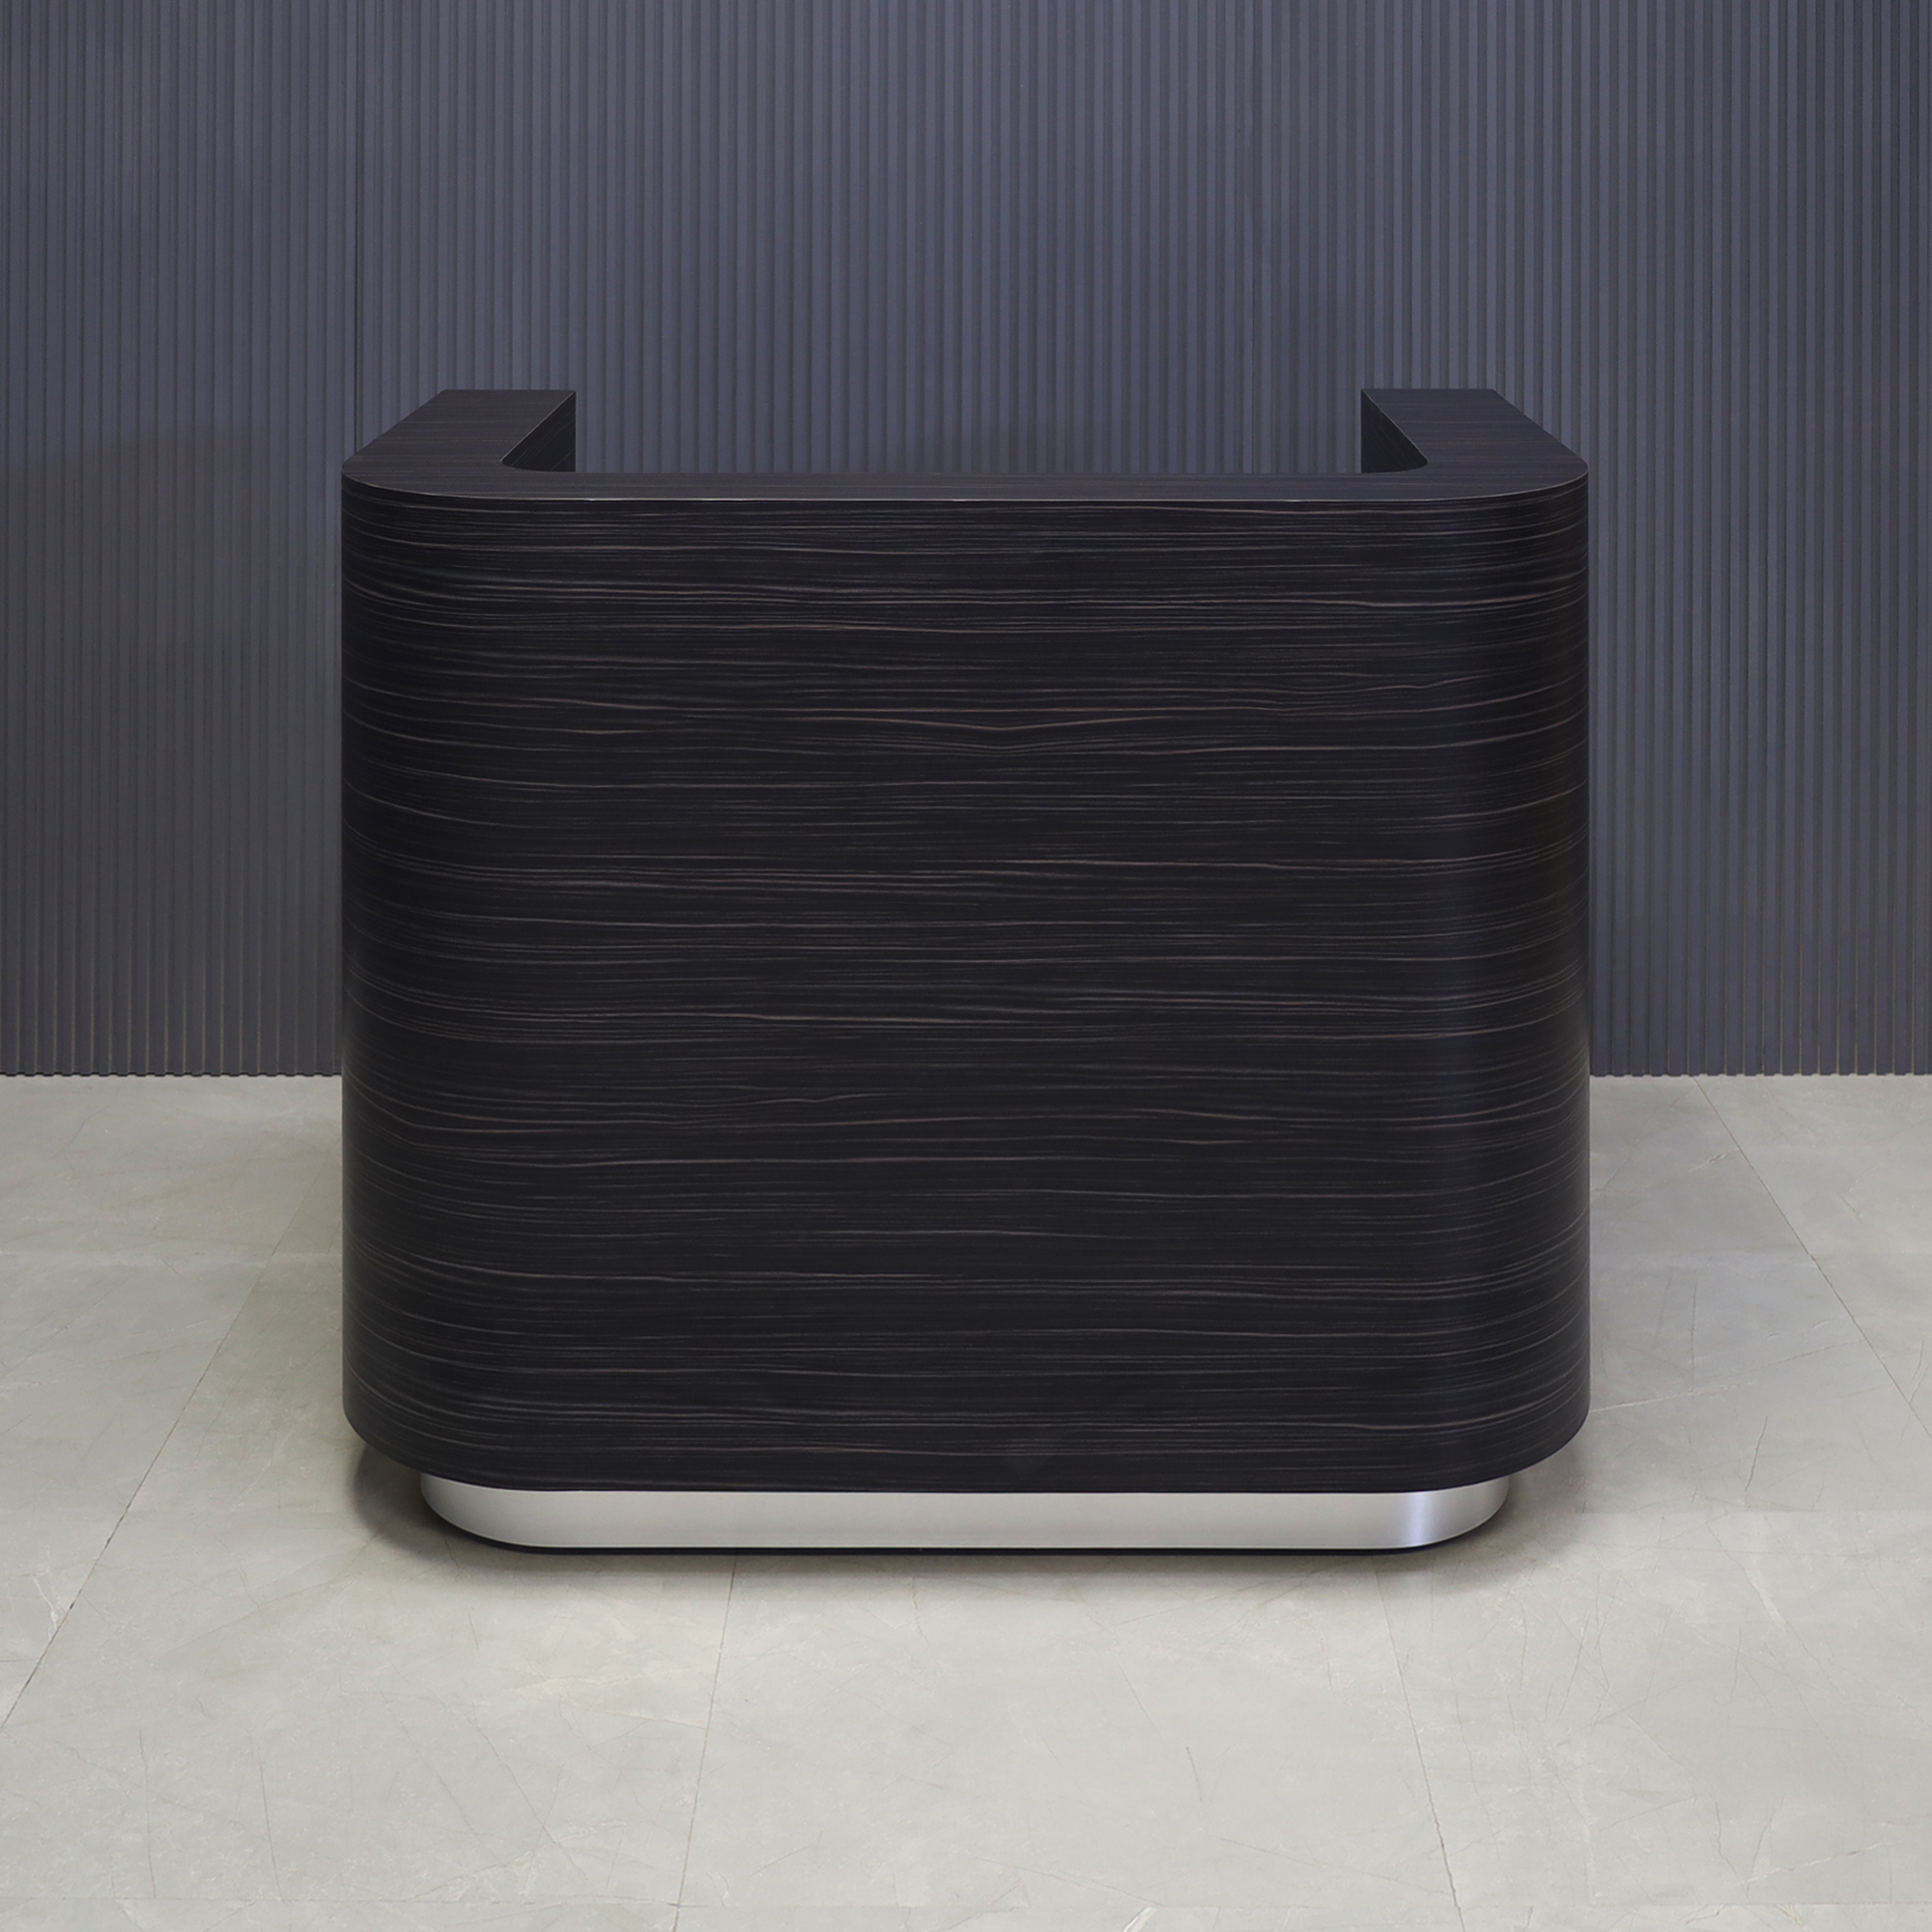 48-inch Nola Reception Desk in madagascar matte laminate main desk and brushed aluminum toe-kick, with color LED shown here.